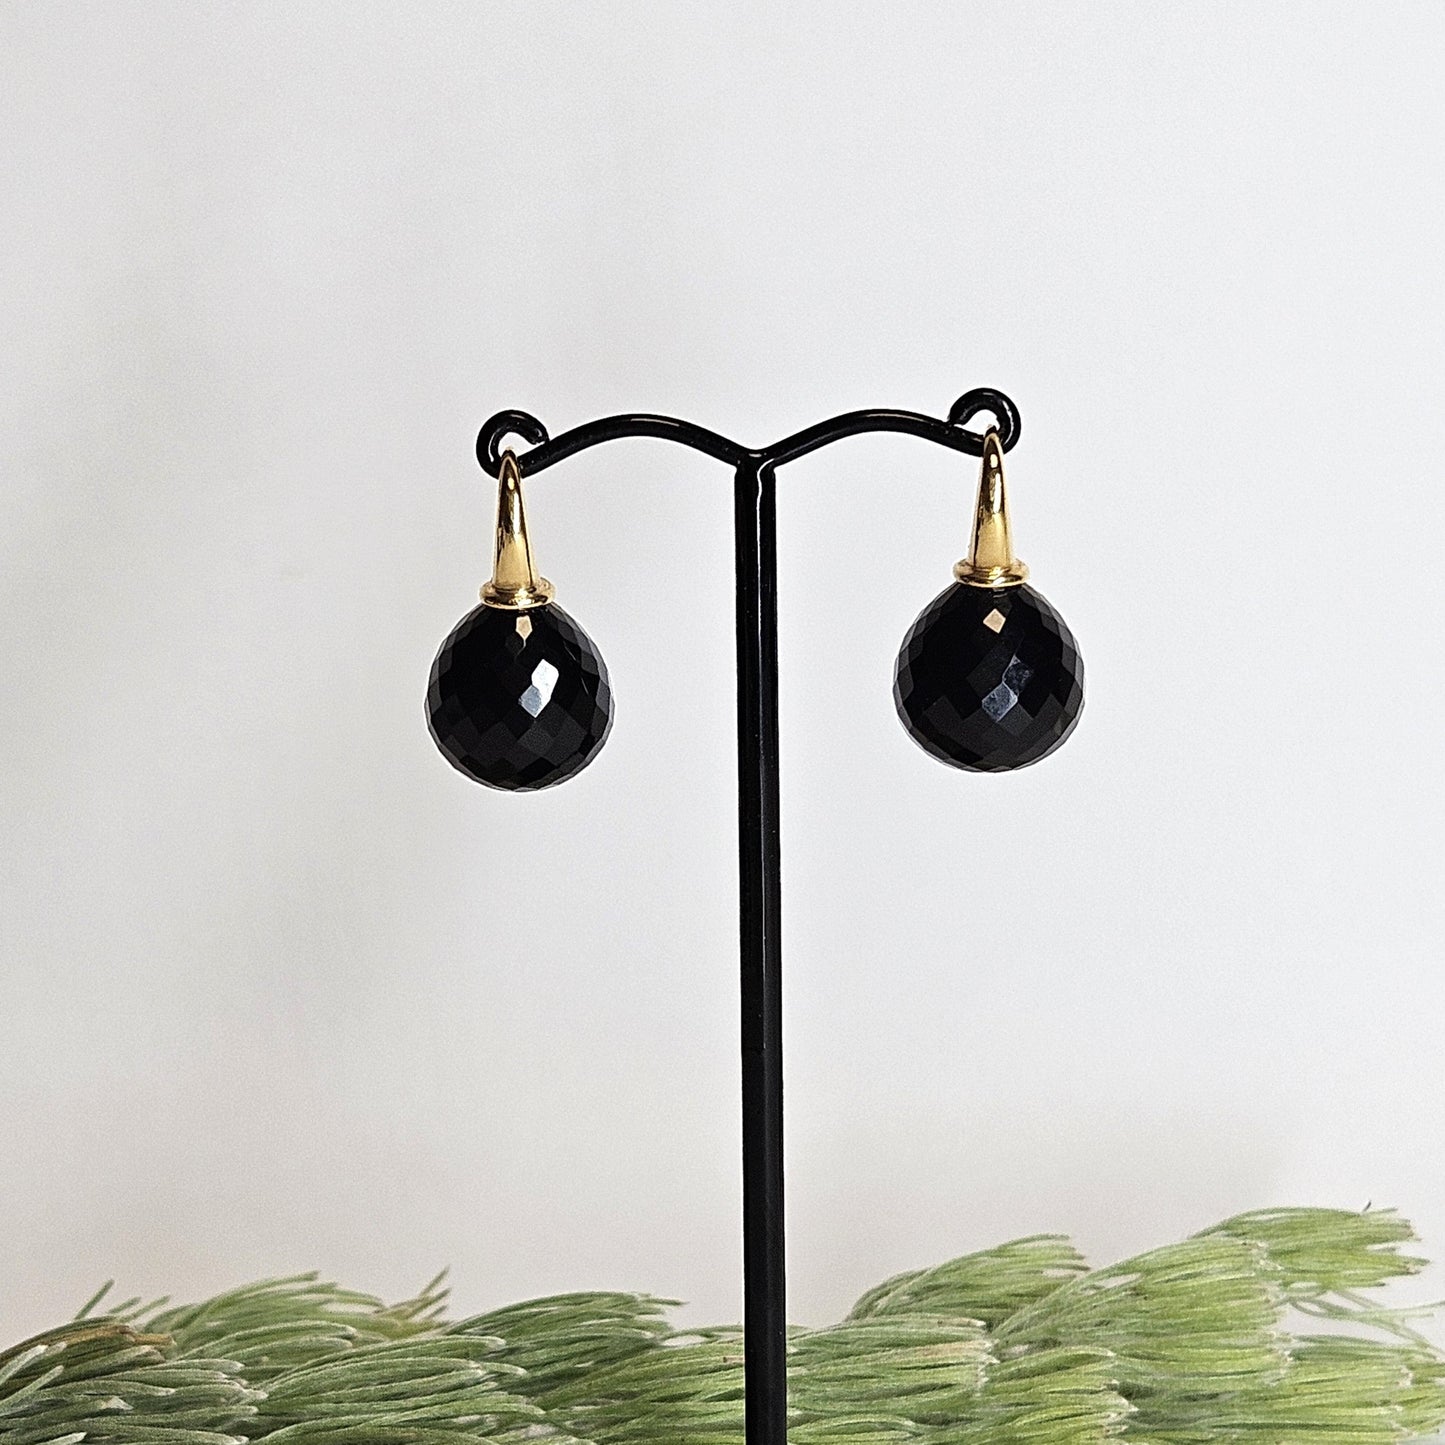 Faceted Onyx earings with horn shaped hook earings